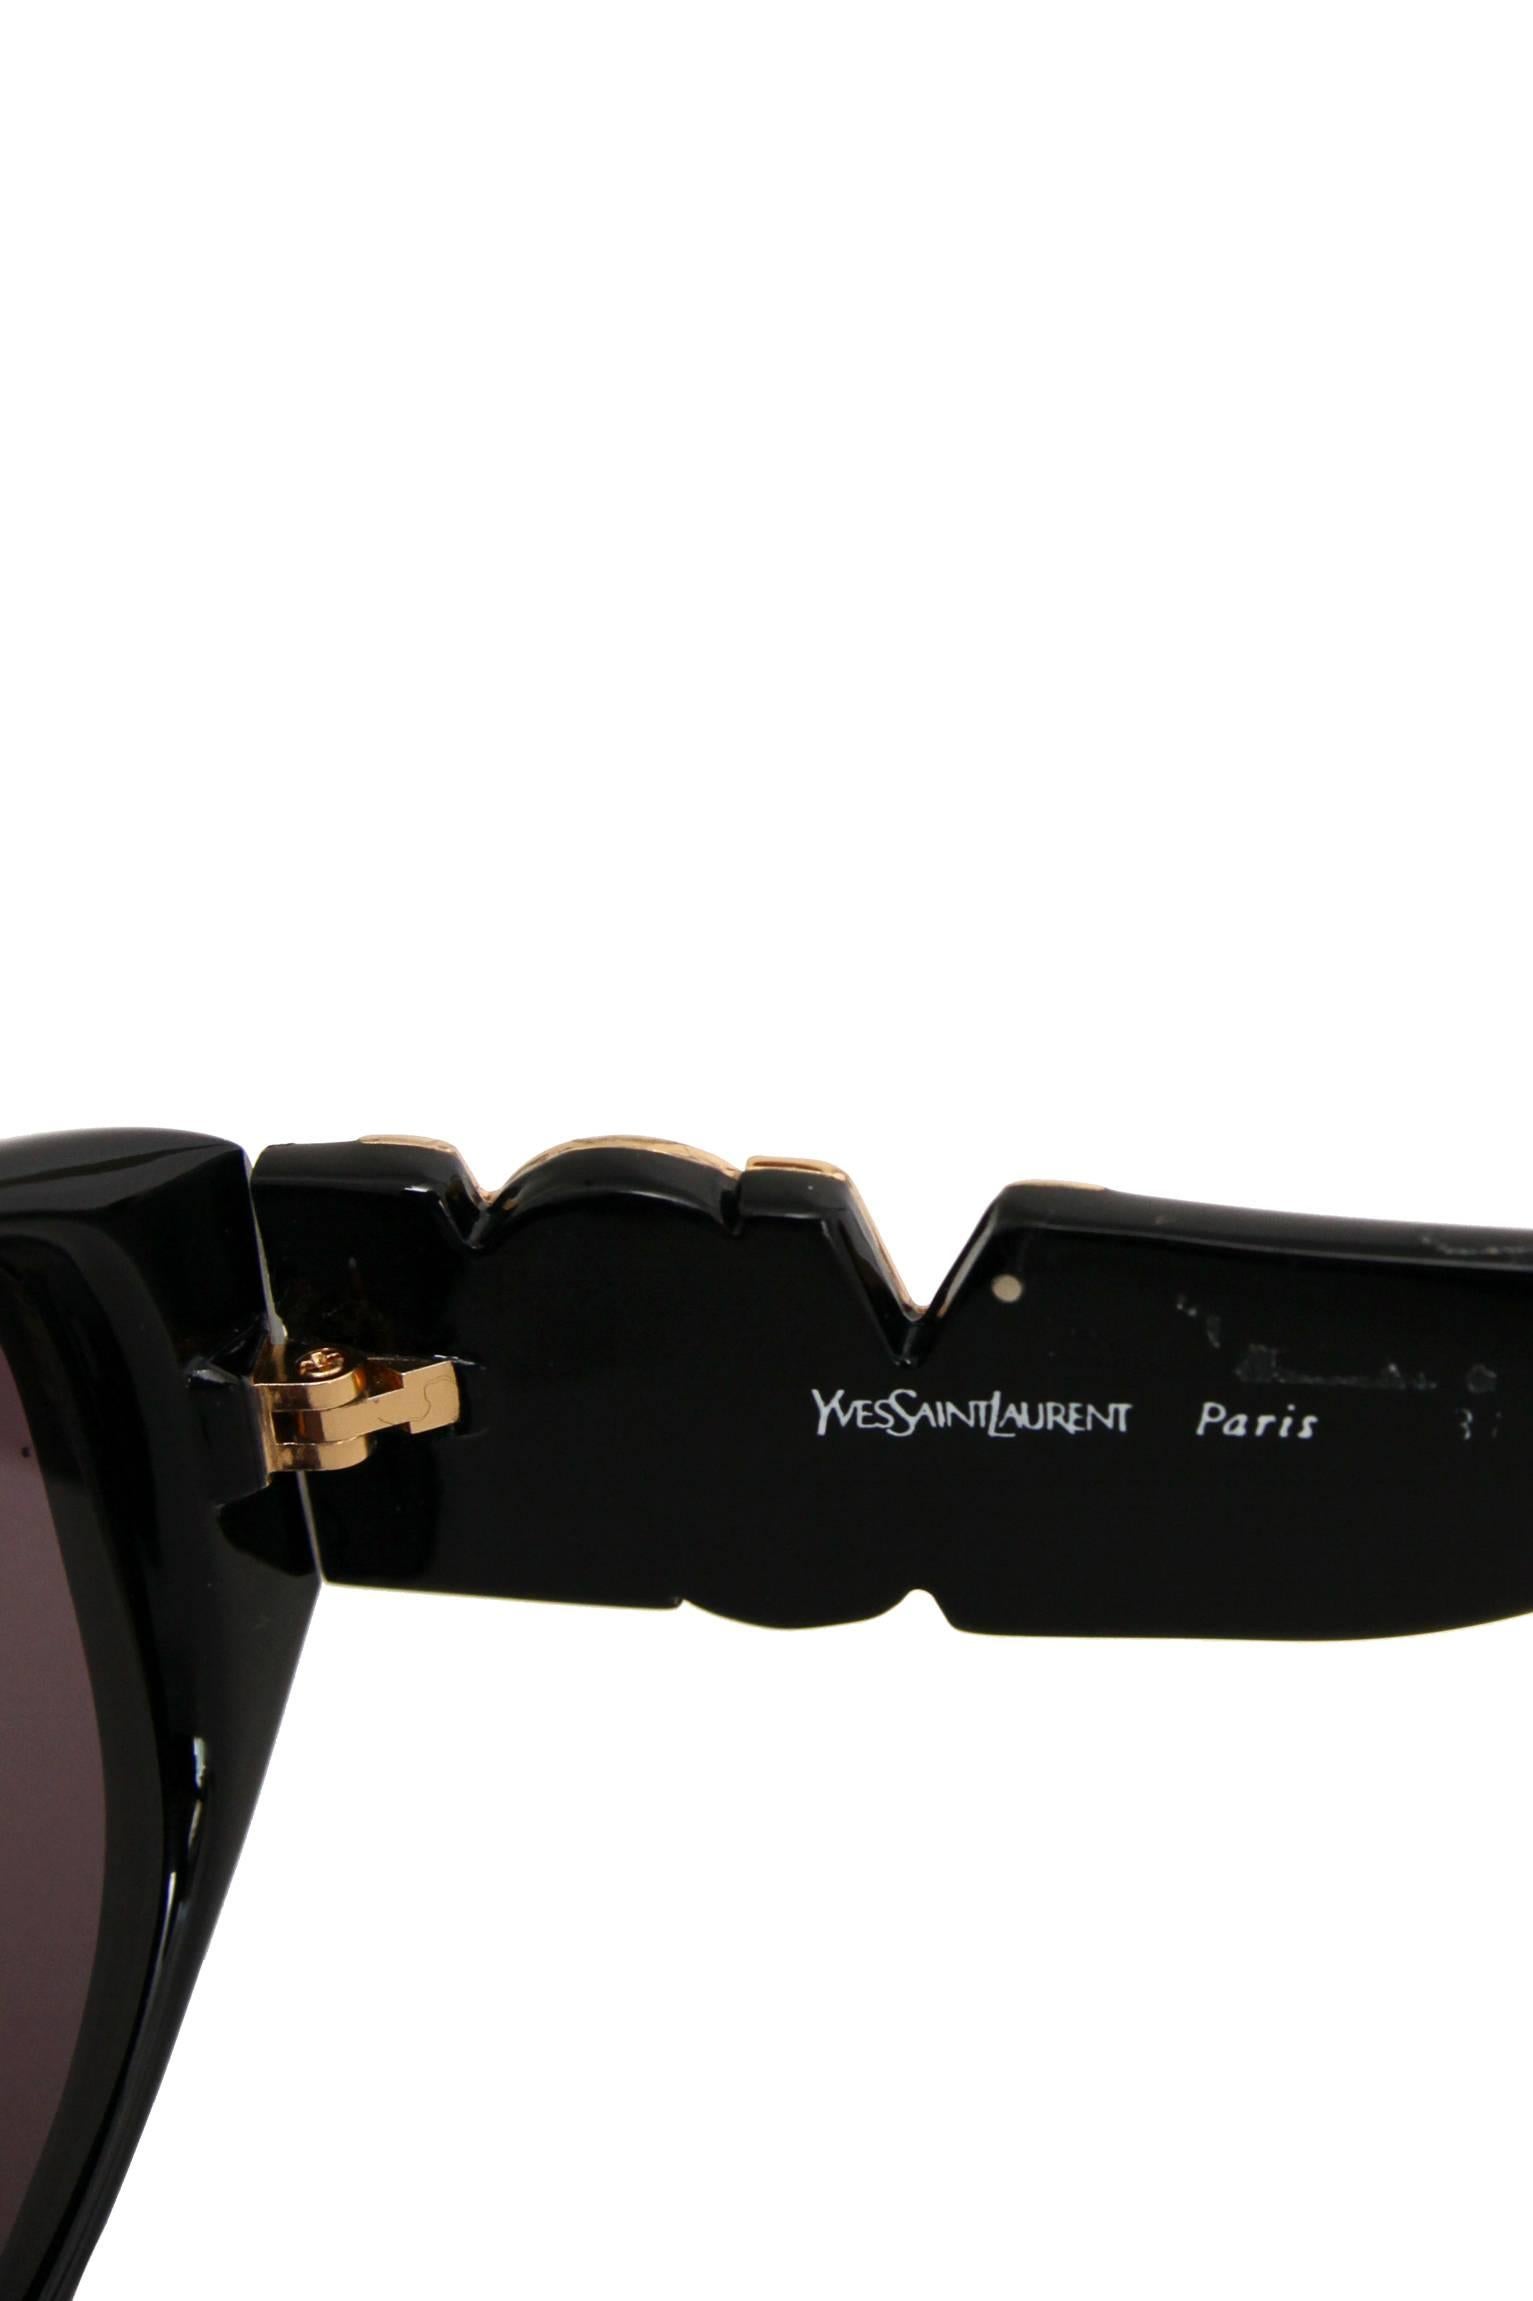 A pair of 1990s black  Yves Saint Laurent sunglasses with black lenses and a large gold toned 'YSL' detail at the top of the temple. 

The logo measures: 3x2 cm

The sunglasses have the following measurements: 
Bridge: 1.5 cm
Temple Length: 13.5